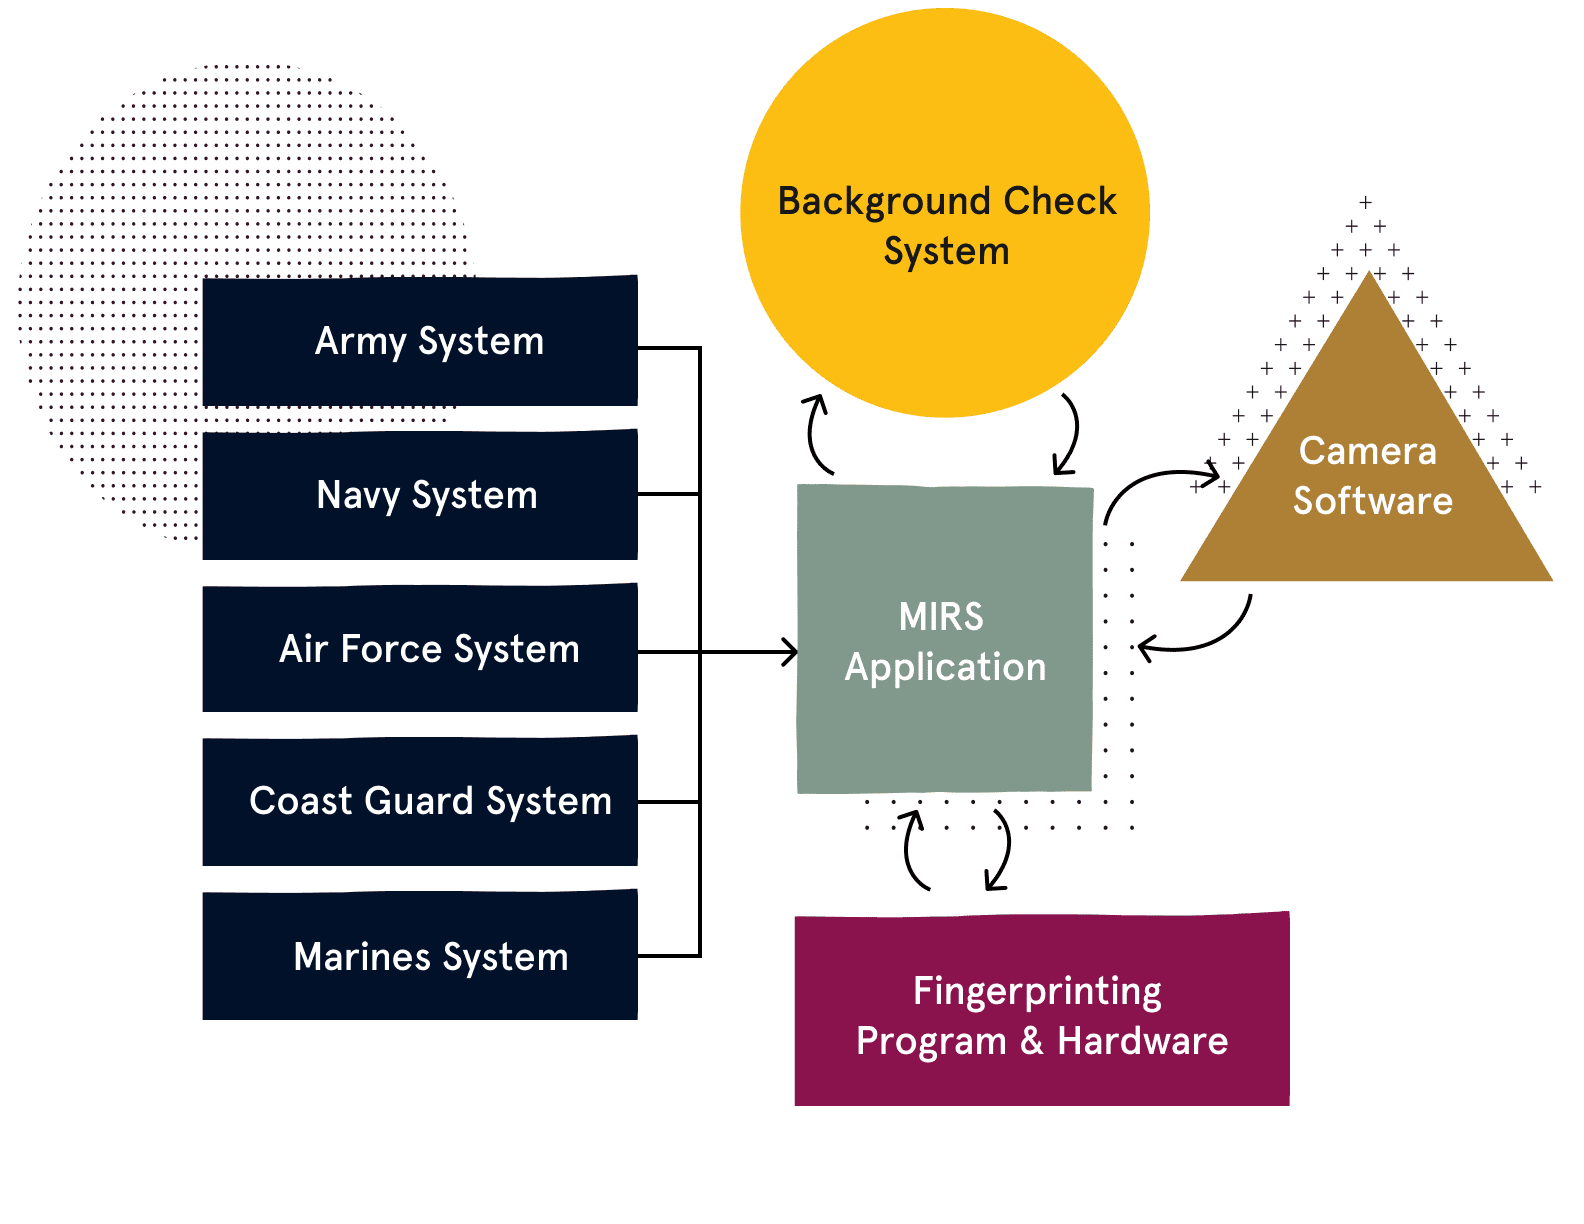 Image shows five military systems feeding into the MIRS Application, as well as back-and-forth communication between the MIRS Application, fingerprinting hardware, background check software, and camera software